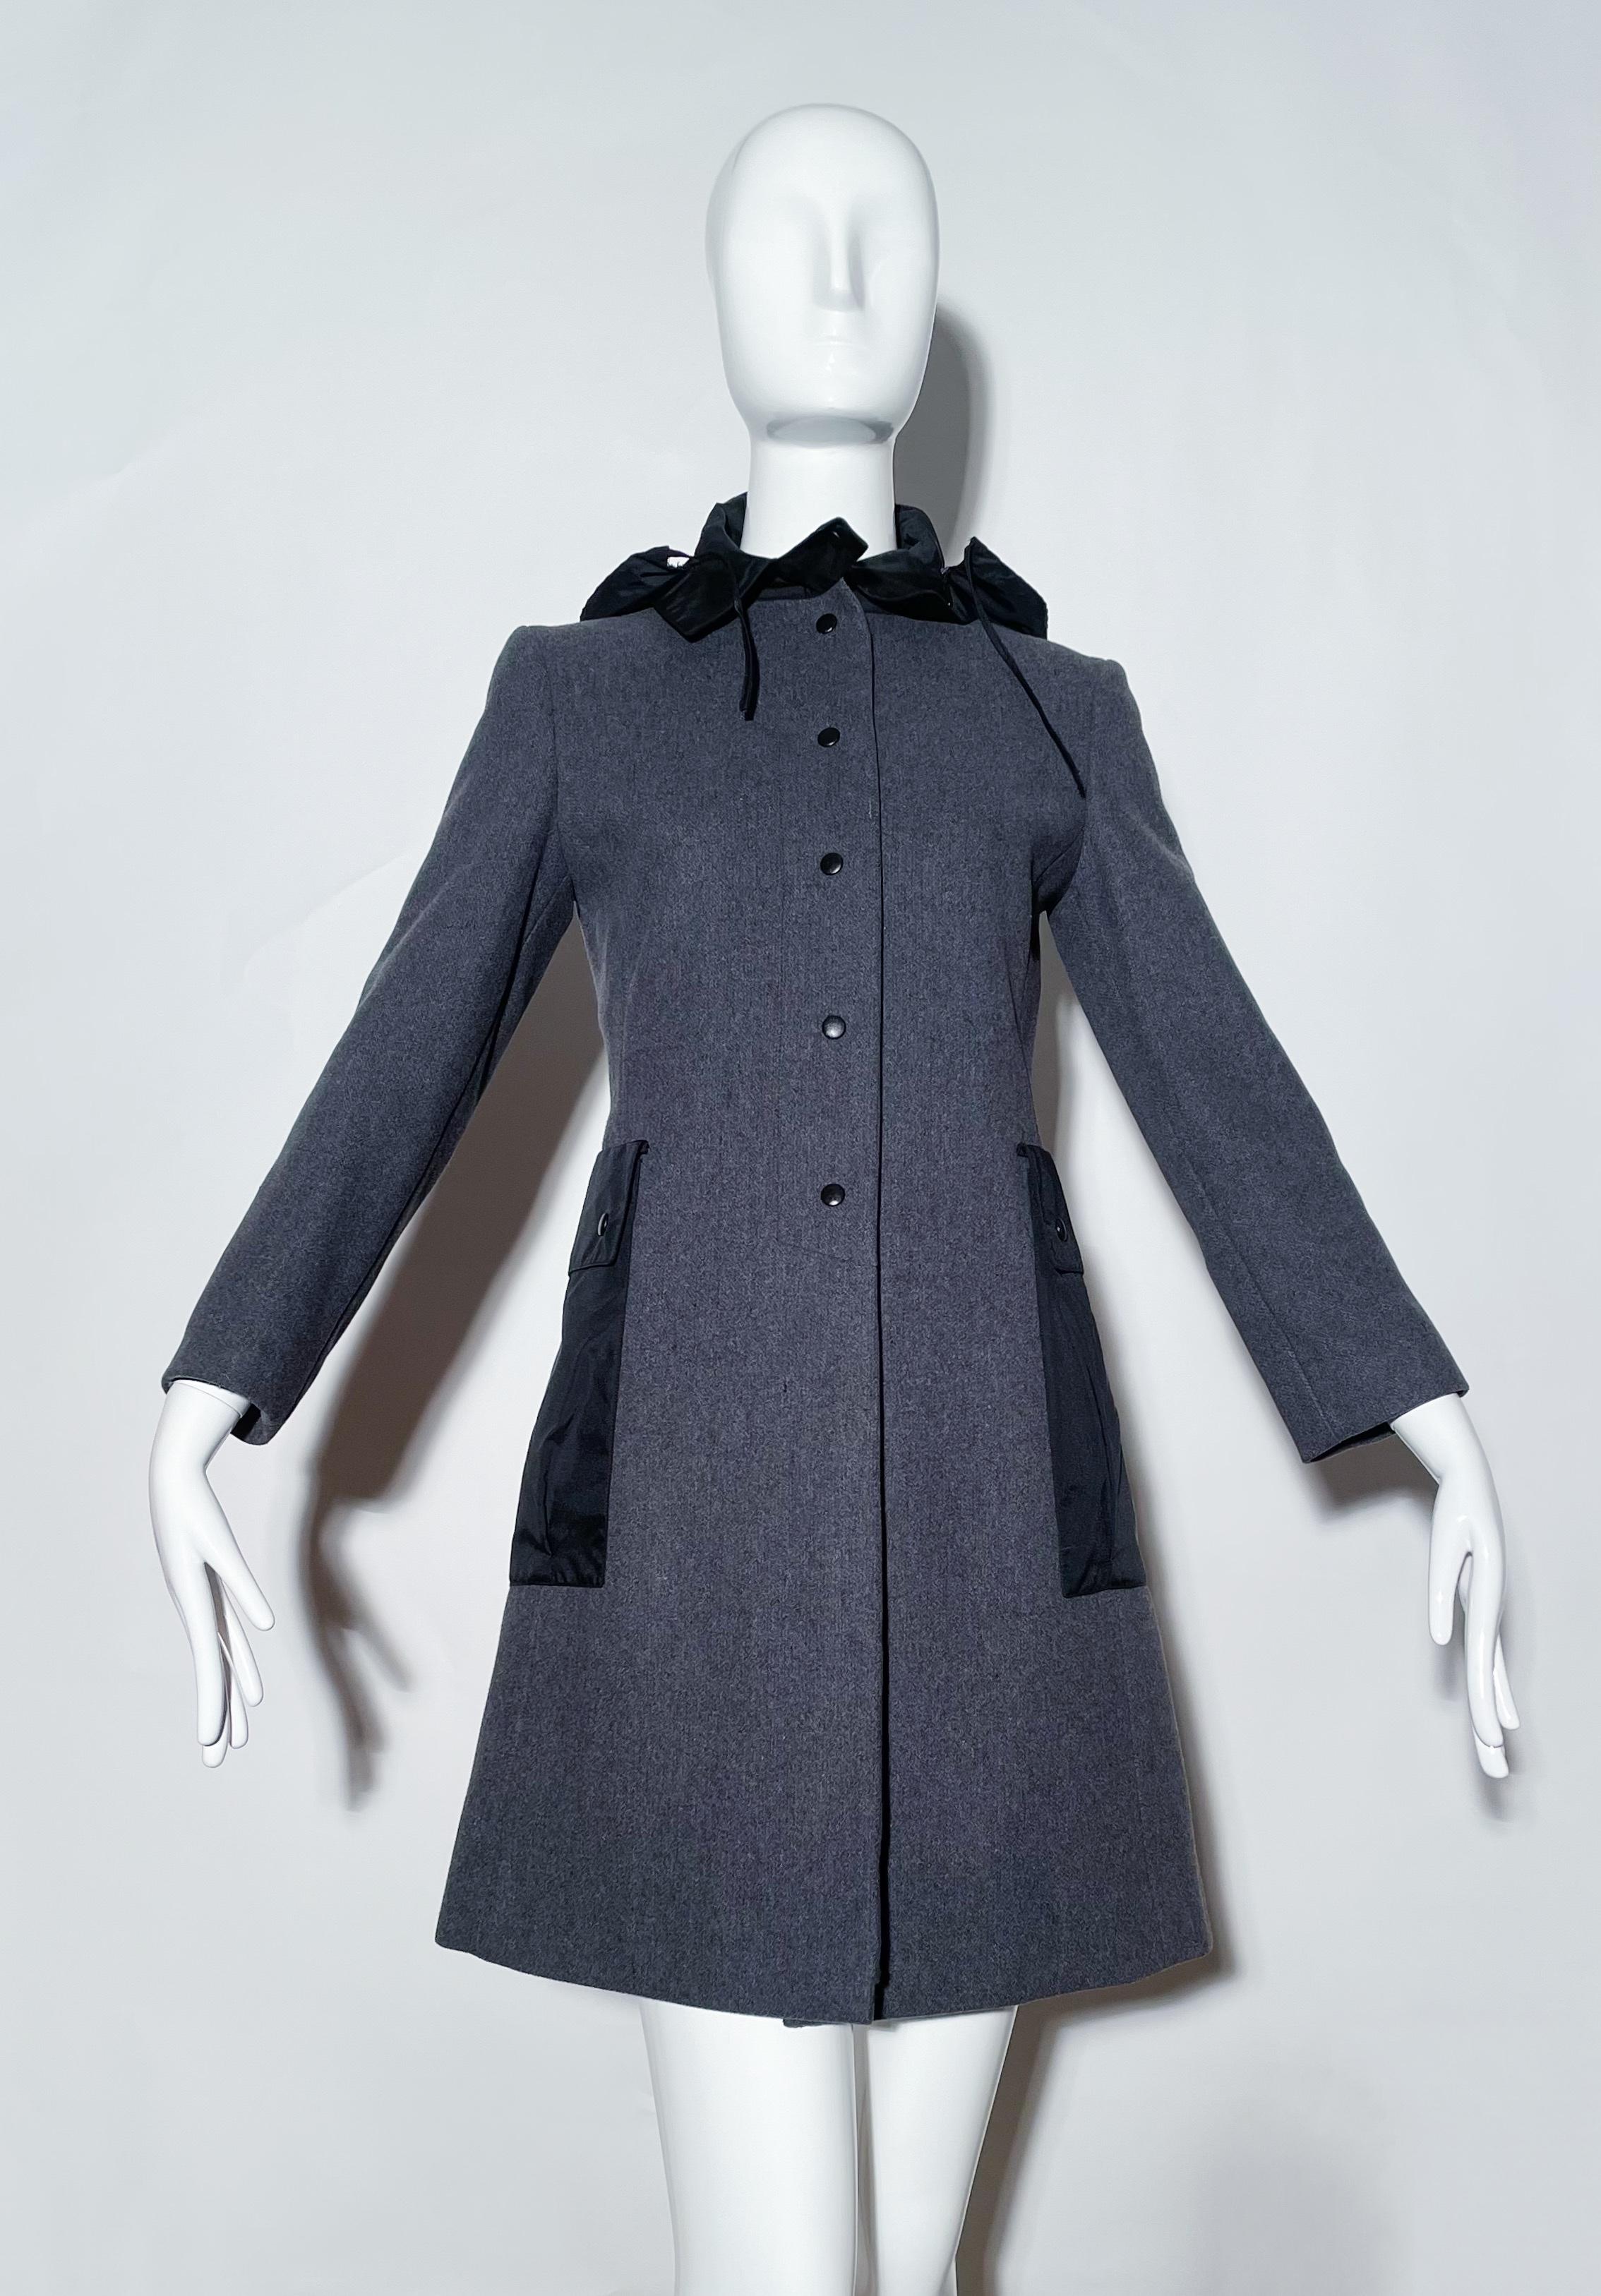 Grey coat with nylon hood and pockets. Front snap closures. Rear slit. Hood can no hidden. Lined. Wool. Made in Italy. 
*Condition: excellent vintage condition. No visible flaws.

Measurements Taken Laying Flat (inches)—
Shoulder to Shoulder: 16